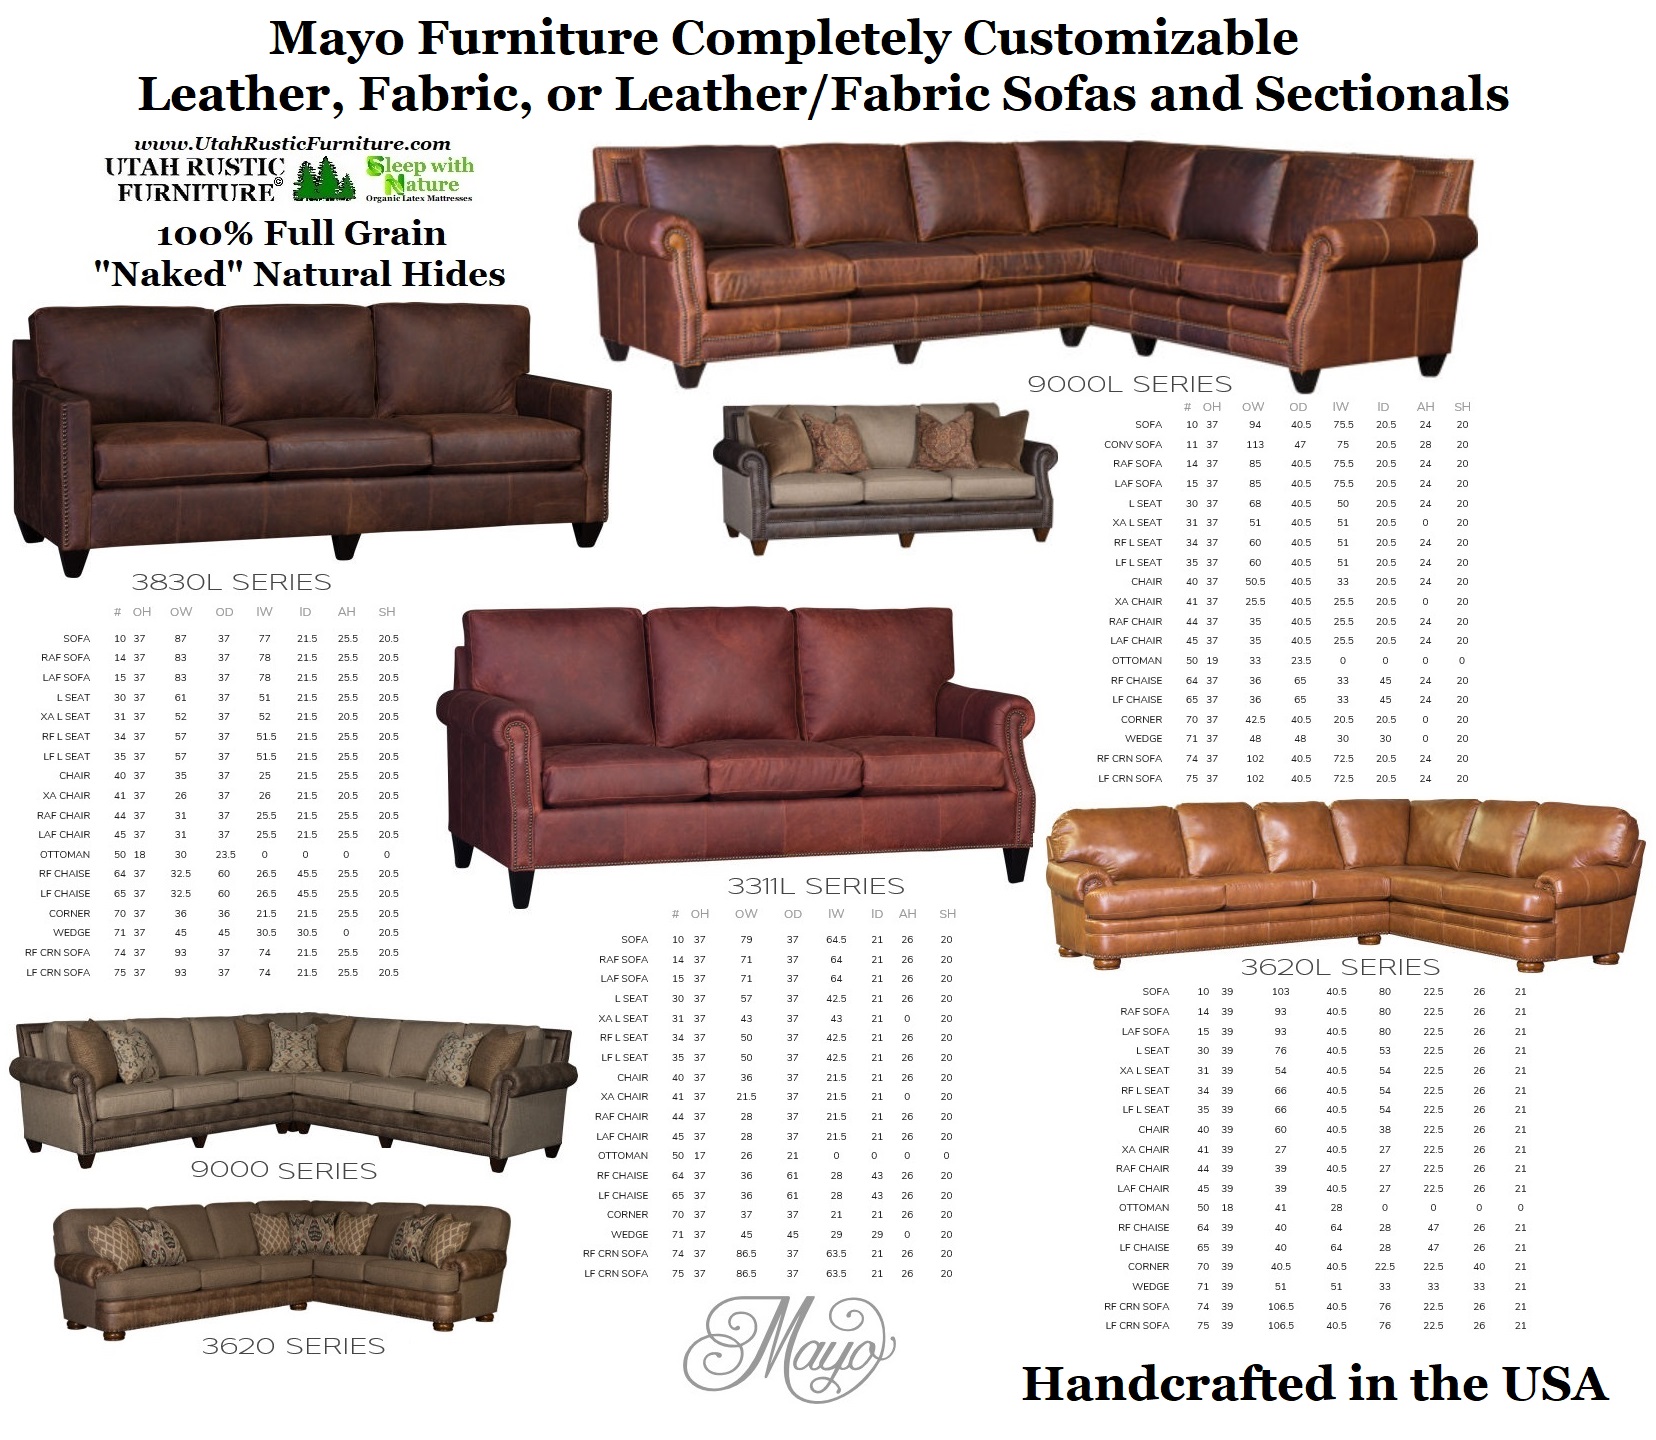 Bradley S Furniture Etc Mayo Leather And Fabric Sofas